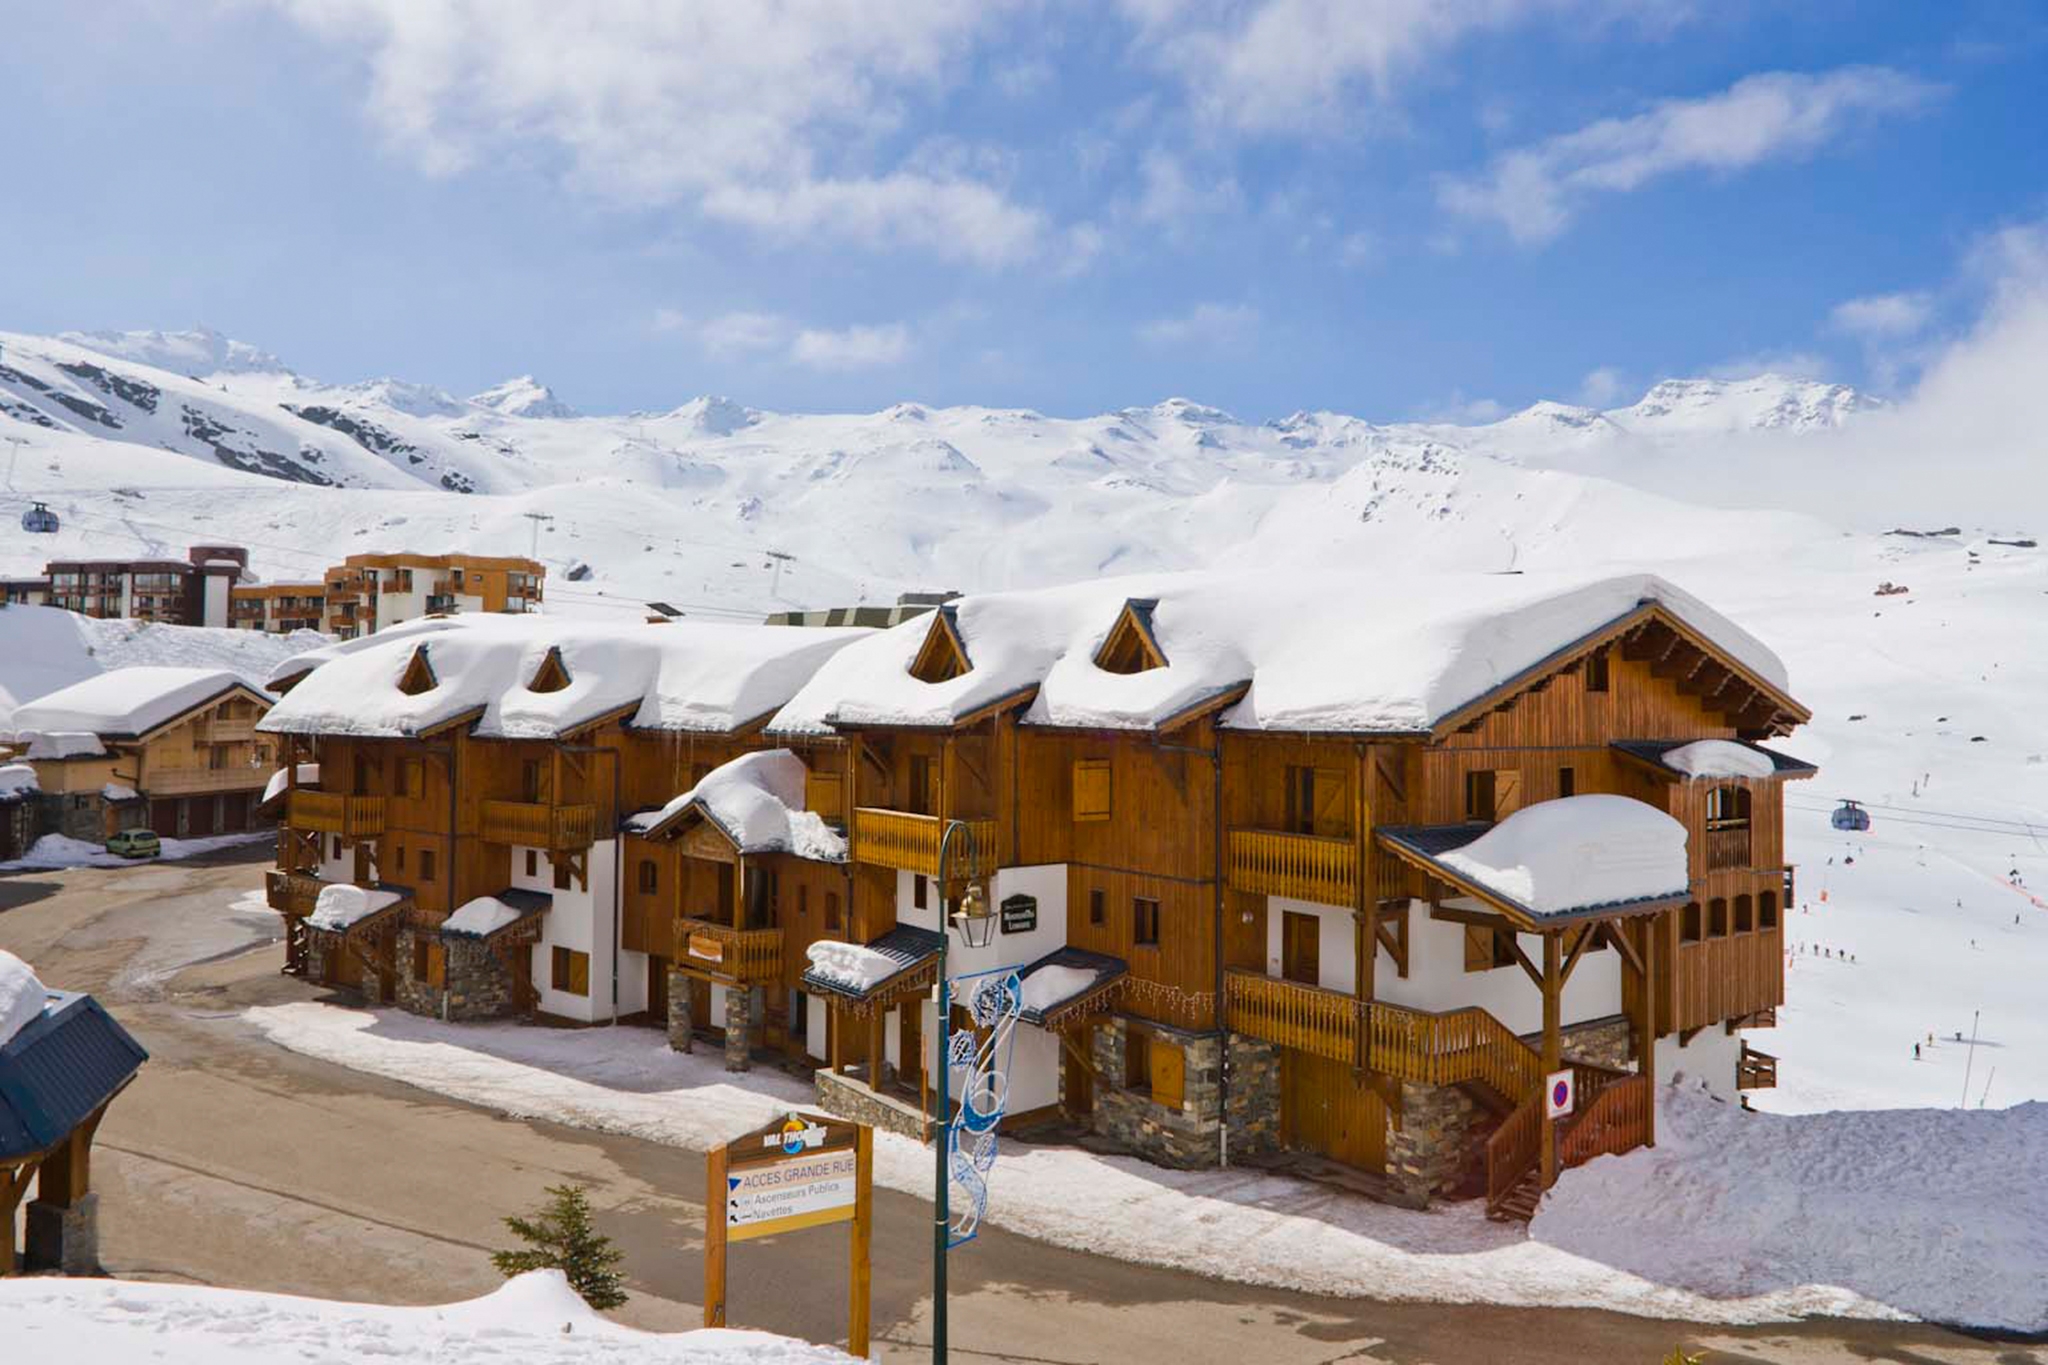 Montagnettes Lombarde in Val Thorens